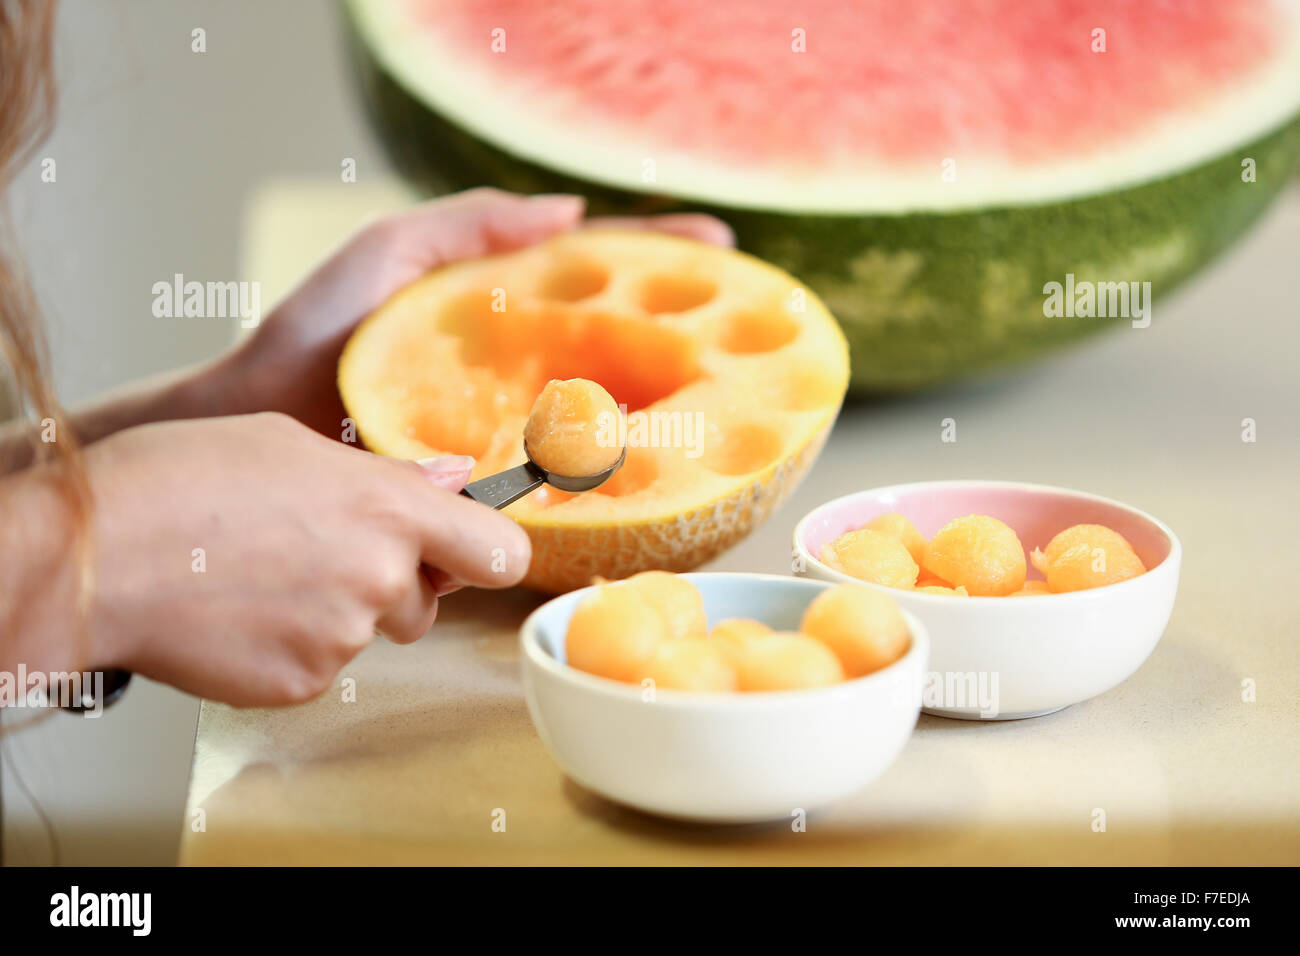 Fruit salad, scooping balls of sweet melon into a bowl. This image has a restriction for licensing in Israel Stock Photo